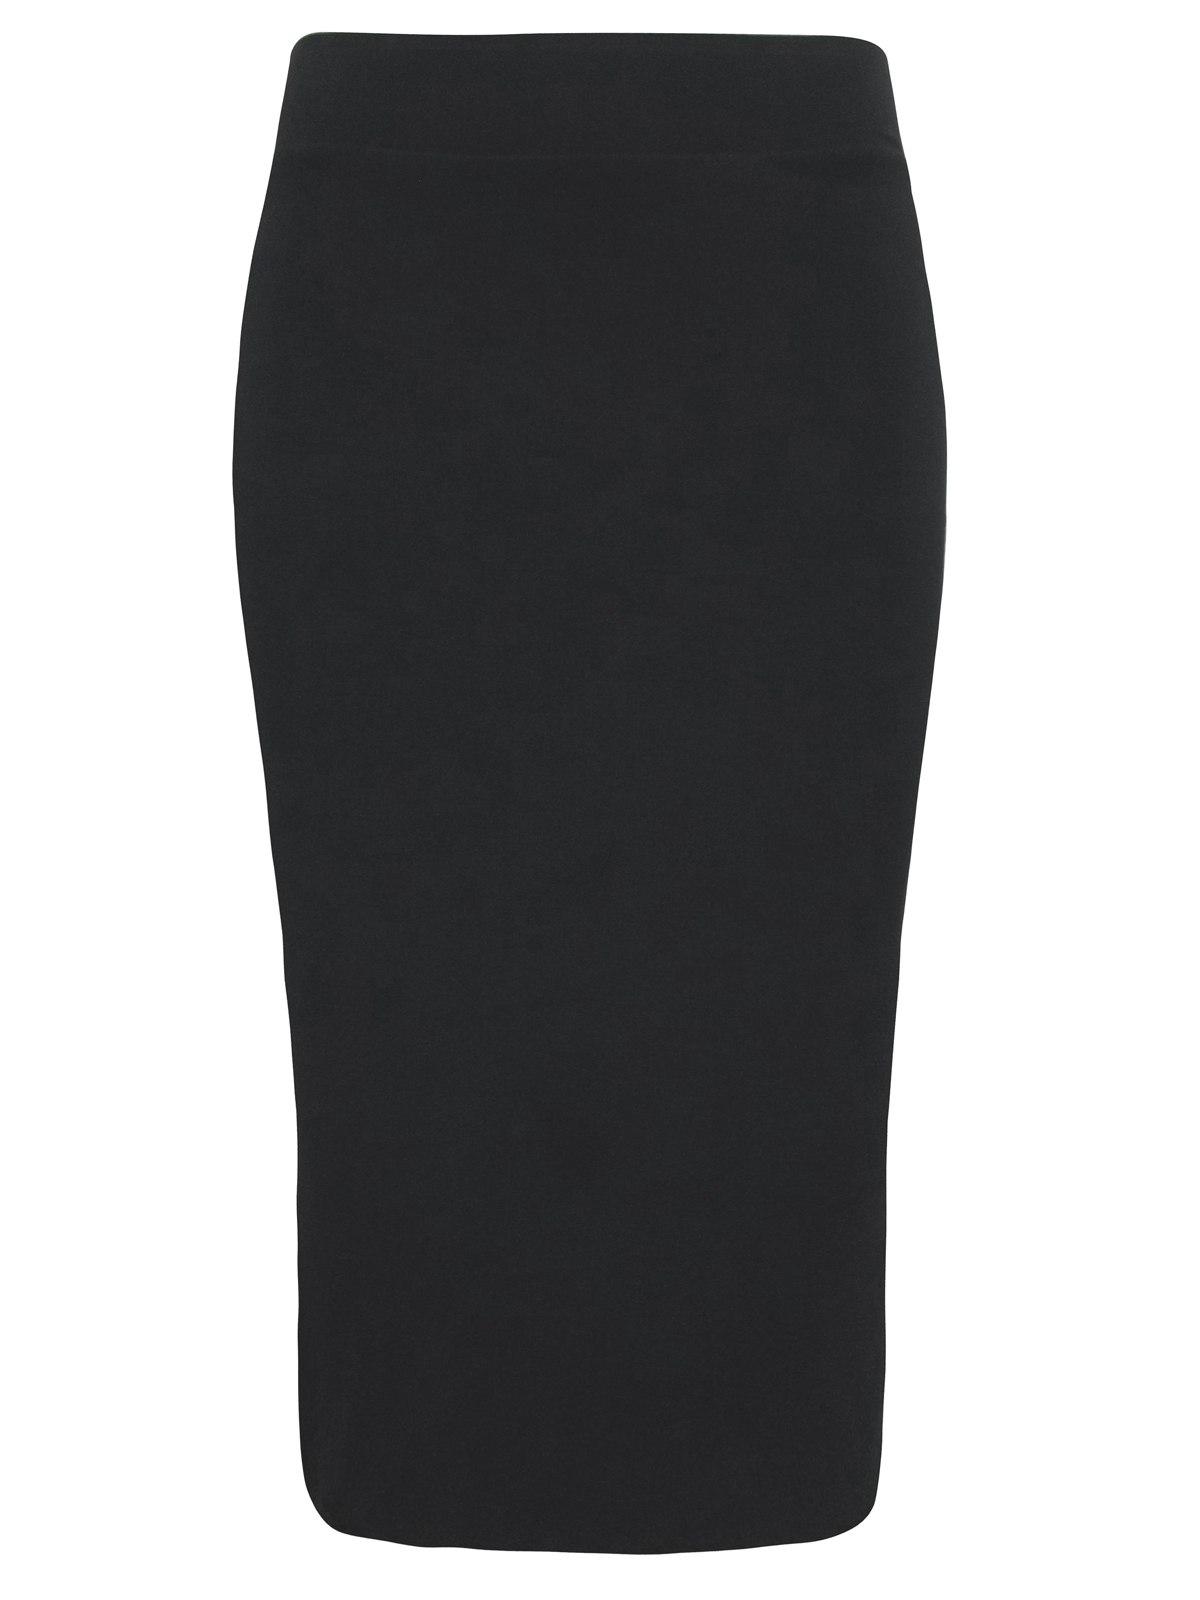 Marks and Spencer - - M&5 BLACK Bodycon Stretch Jersey Pencil Skirt ...